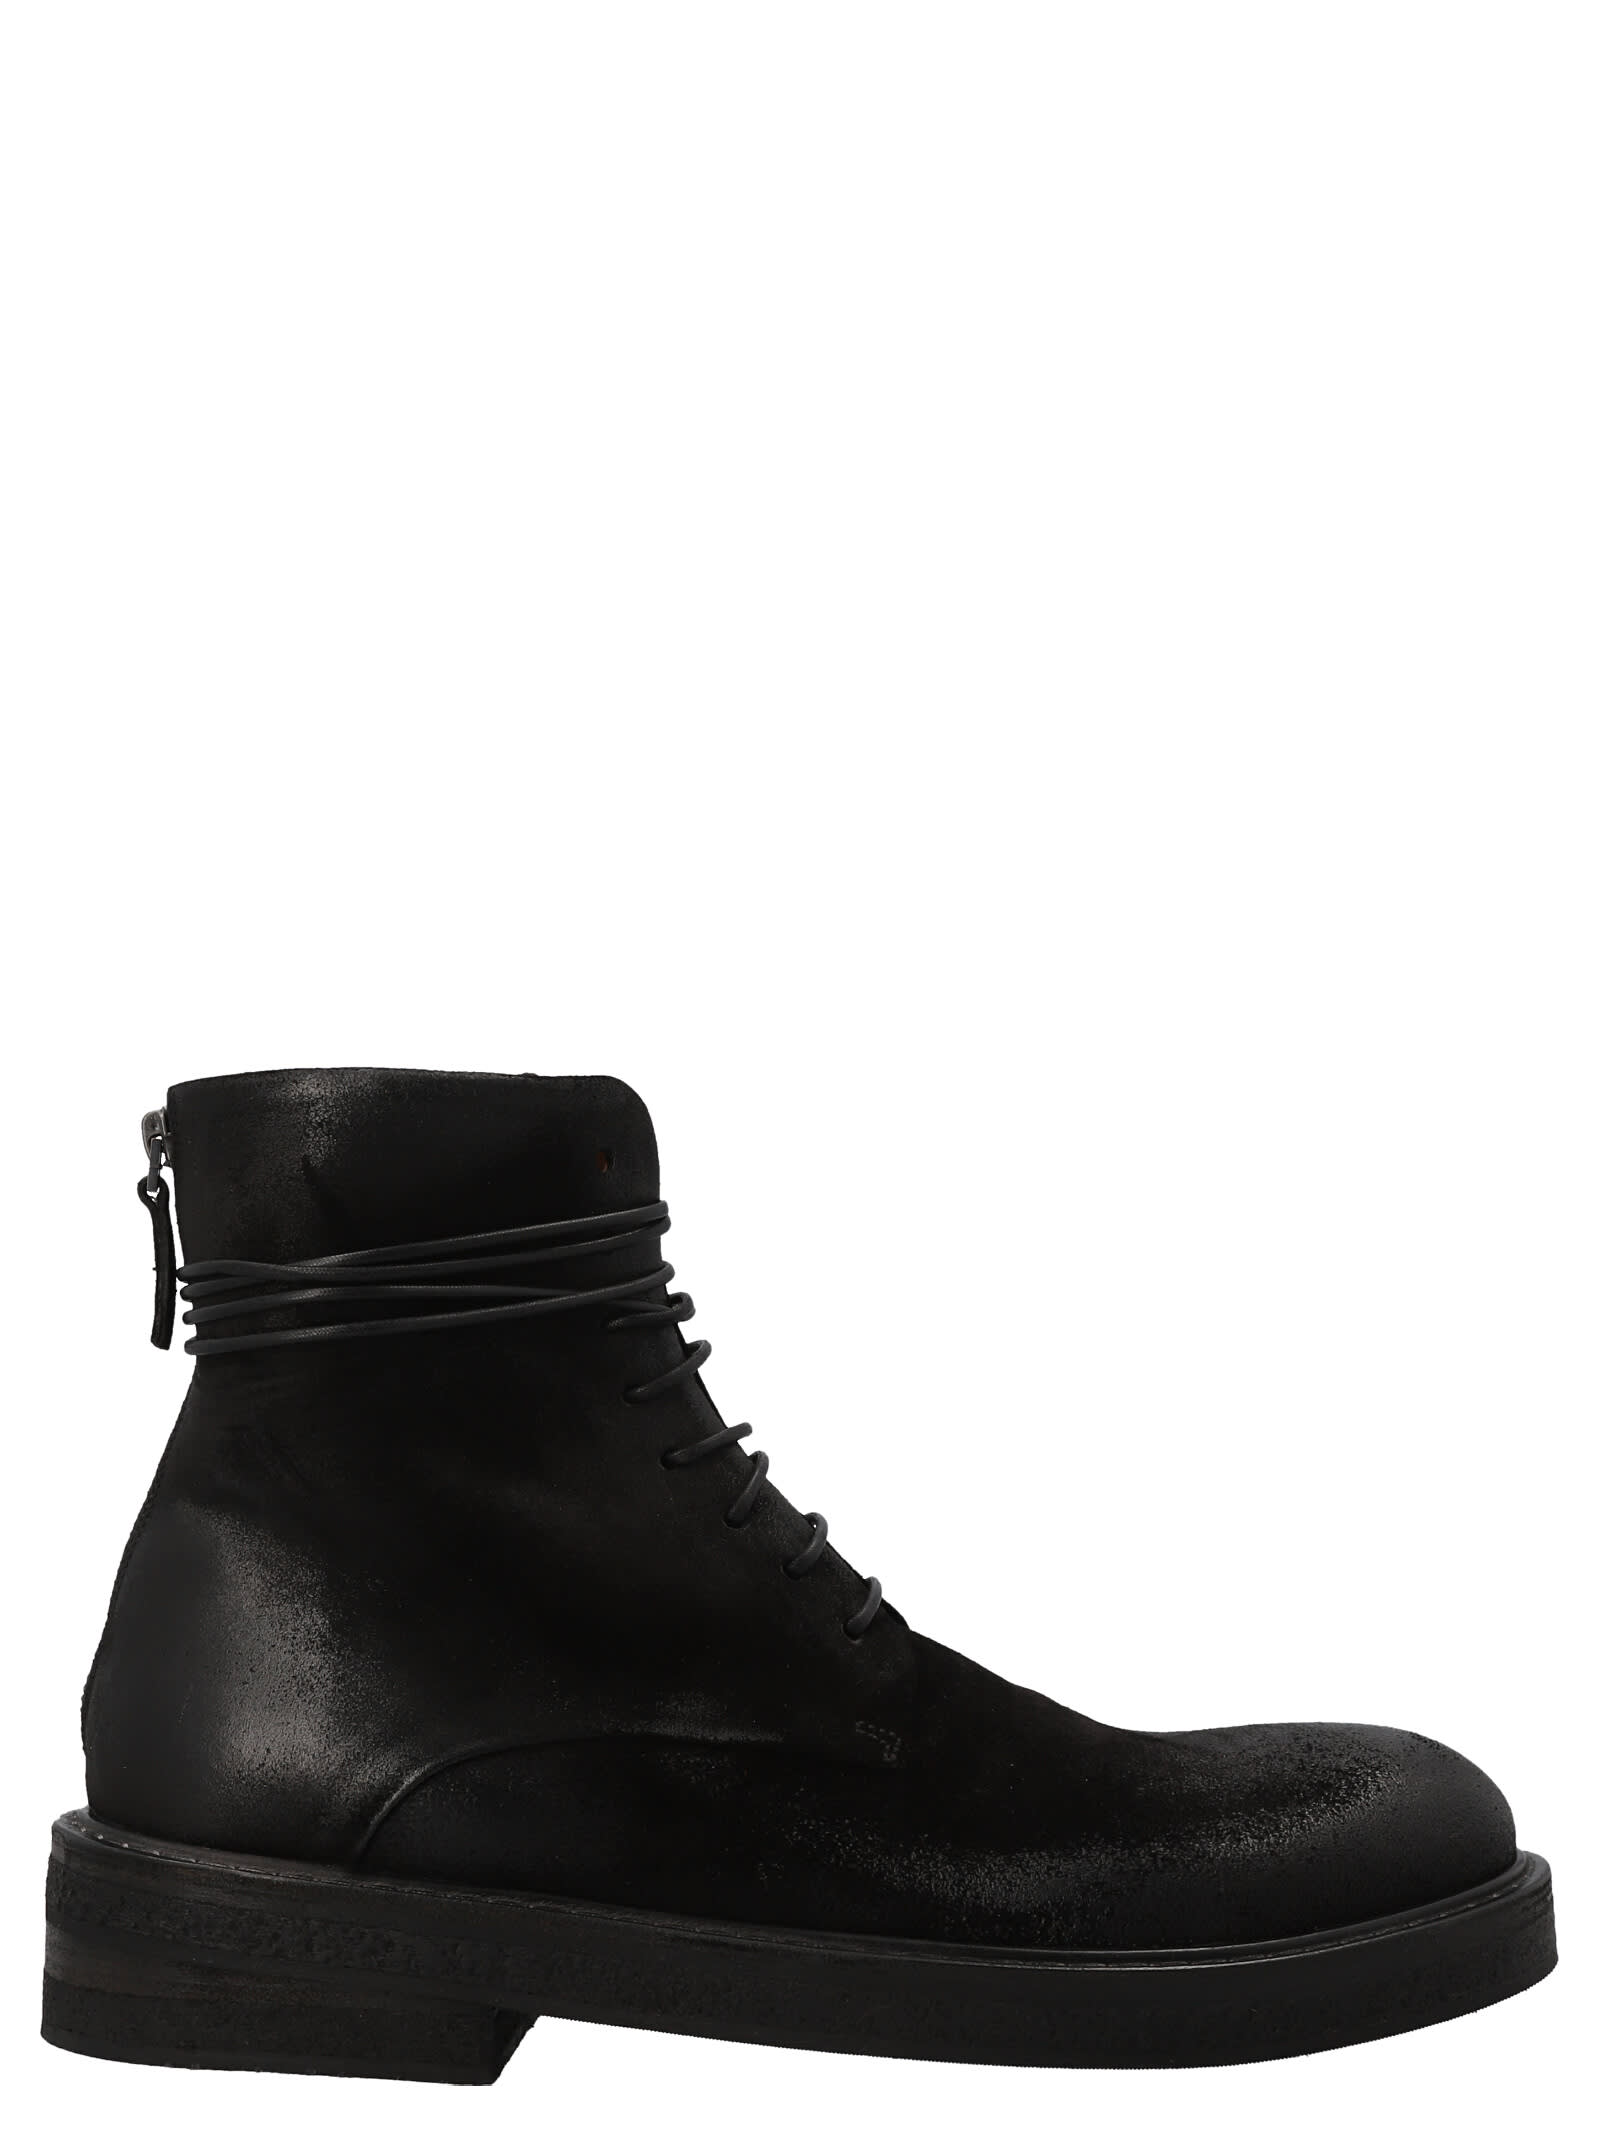 Marsell parrucca Ankle Boots